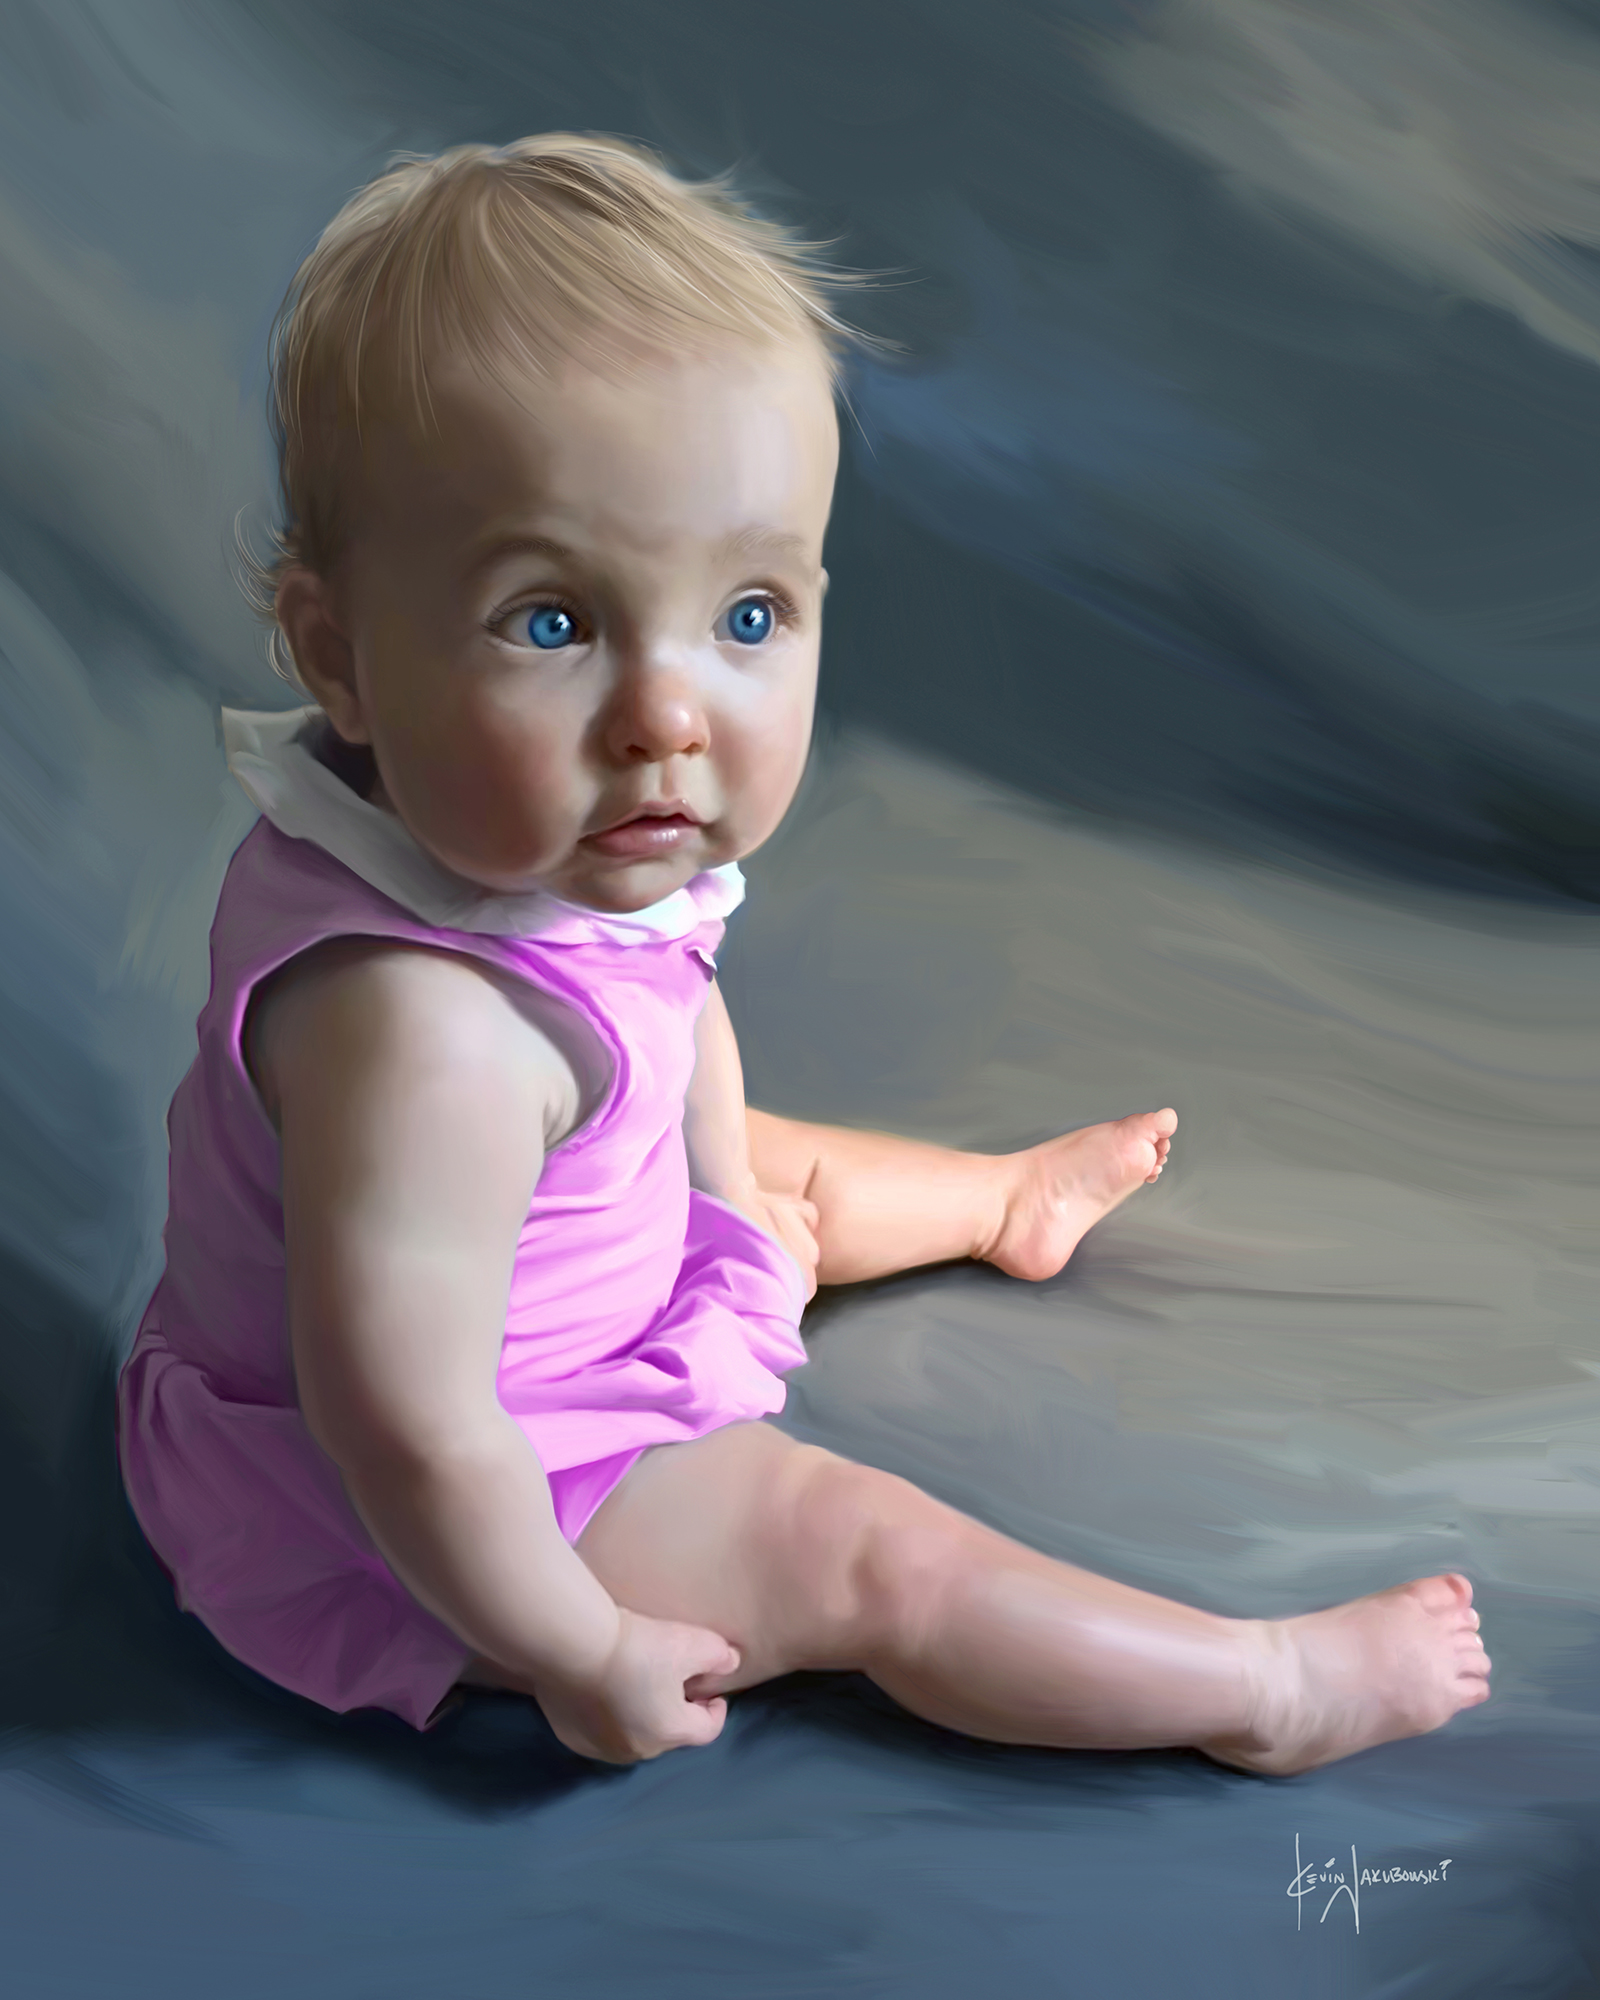 Kate-for-mom-16x20CANVAS.jpg